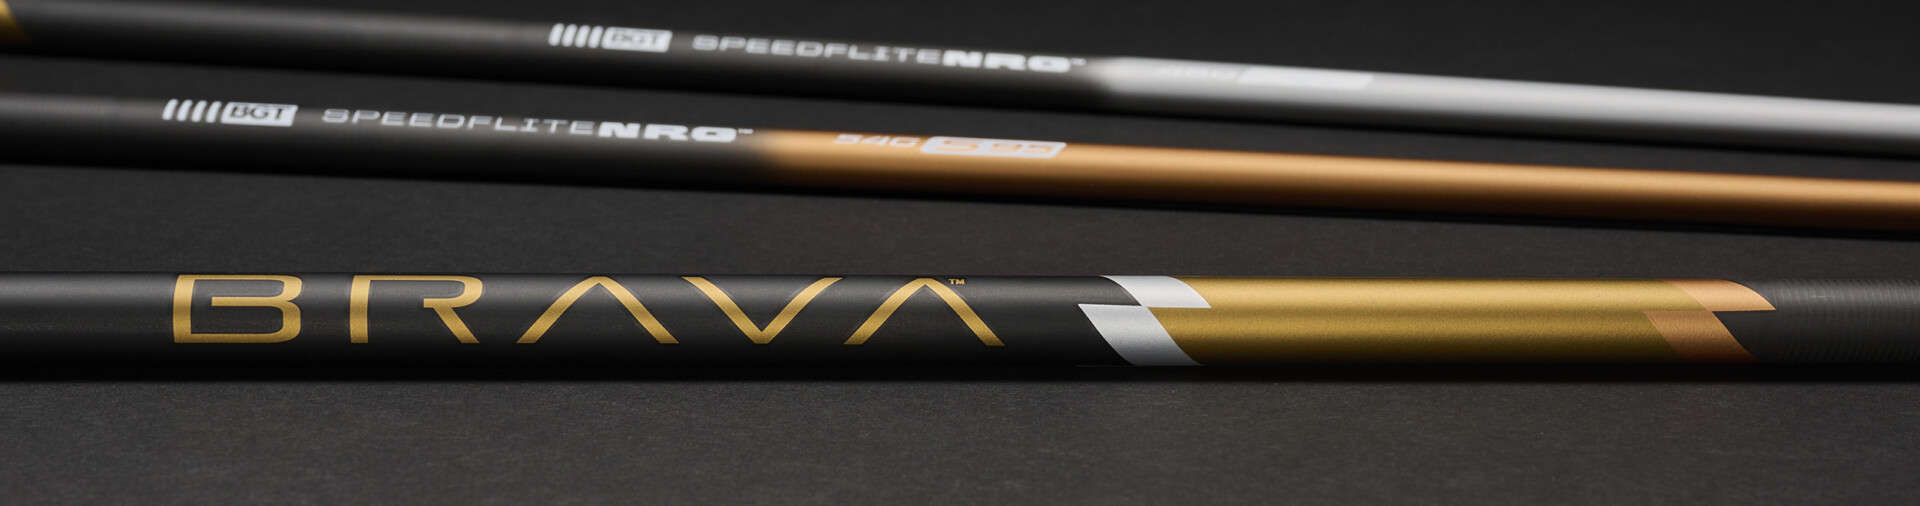 BRAVA Driver Shafts Review - Add Some New Life to Your Drives!